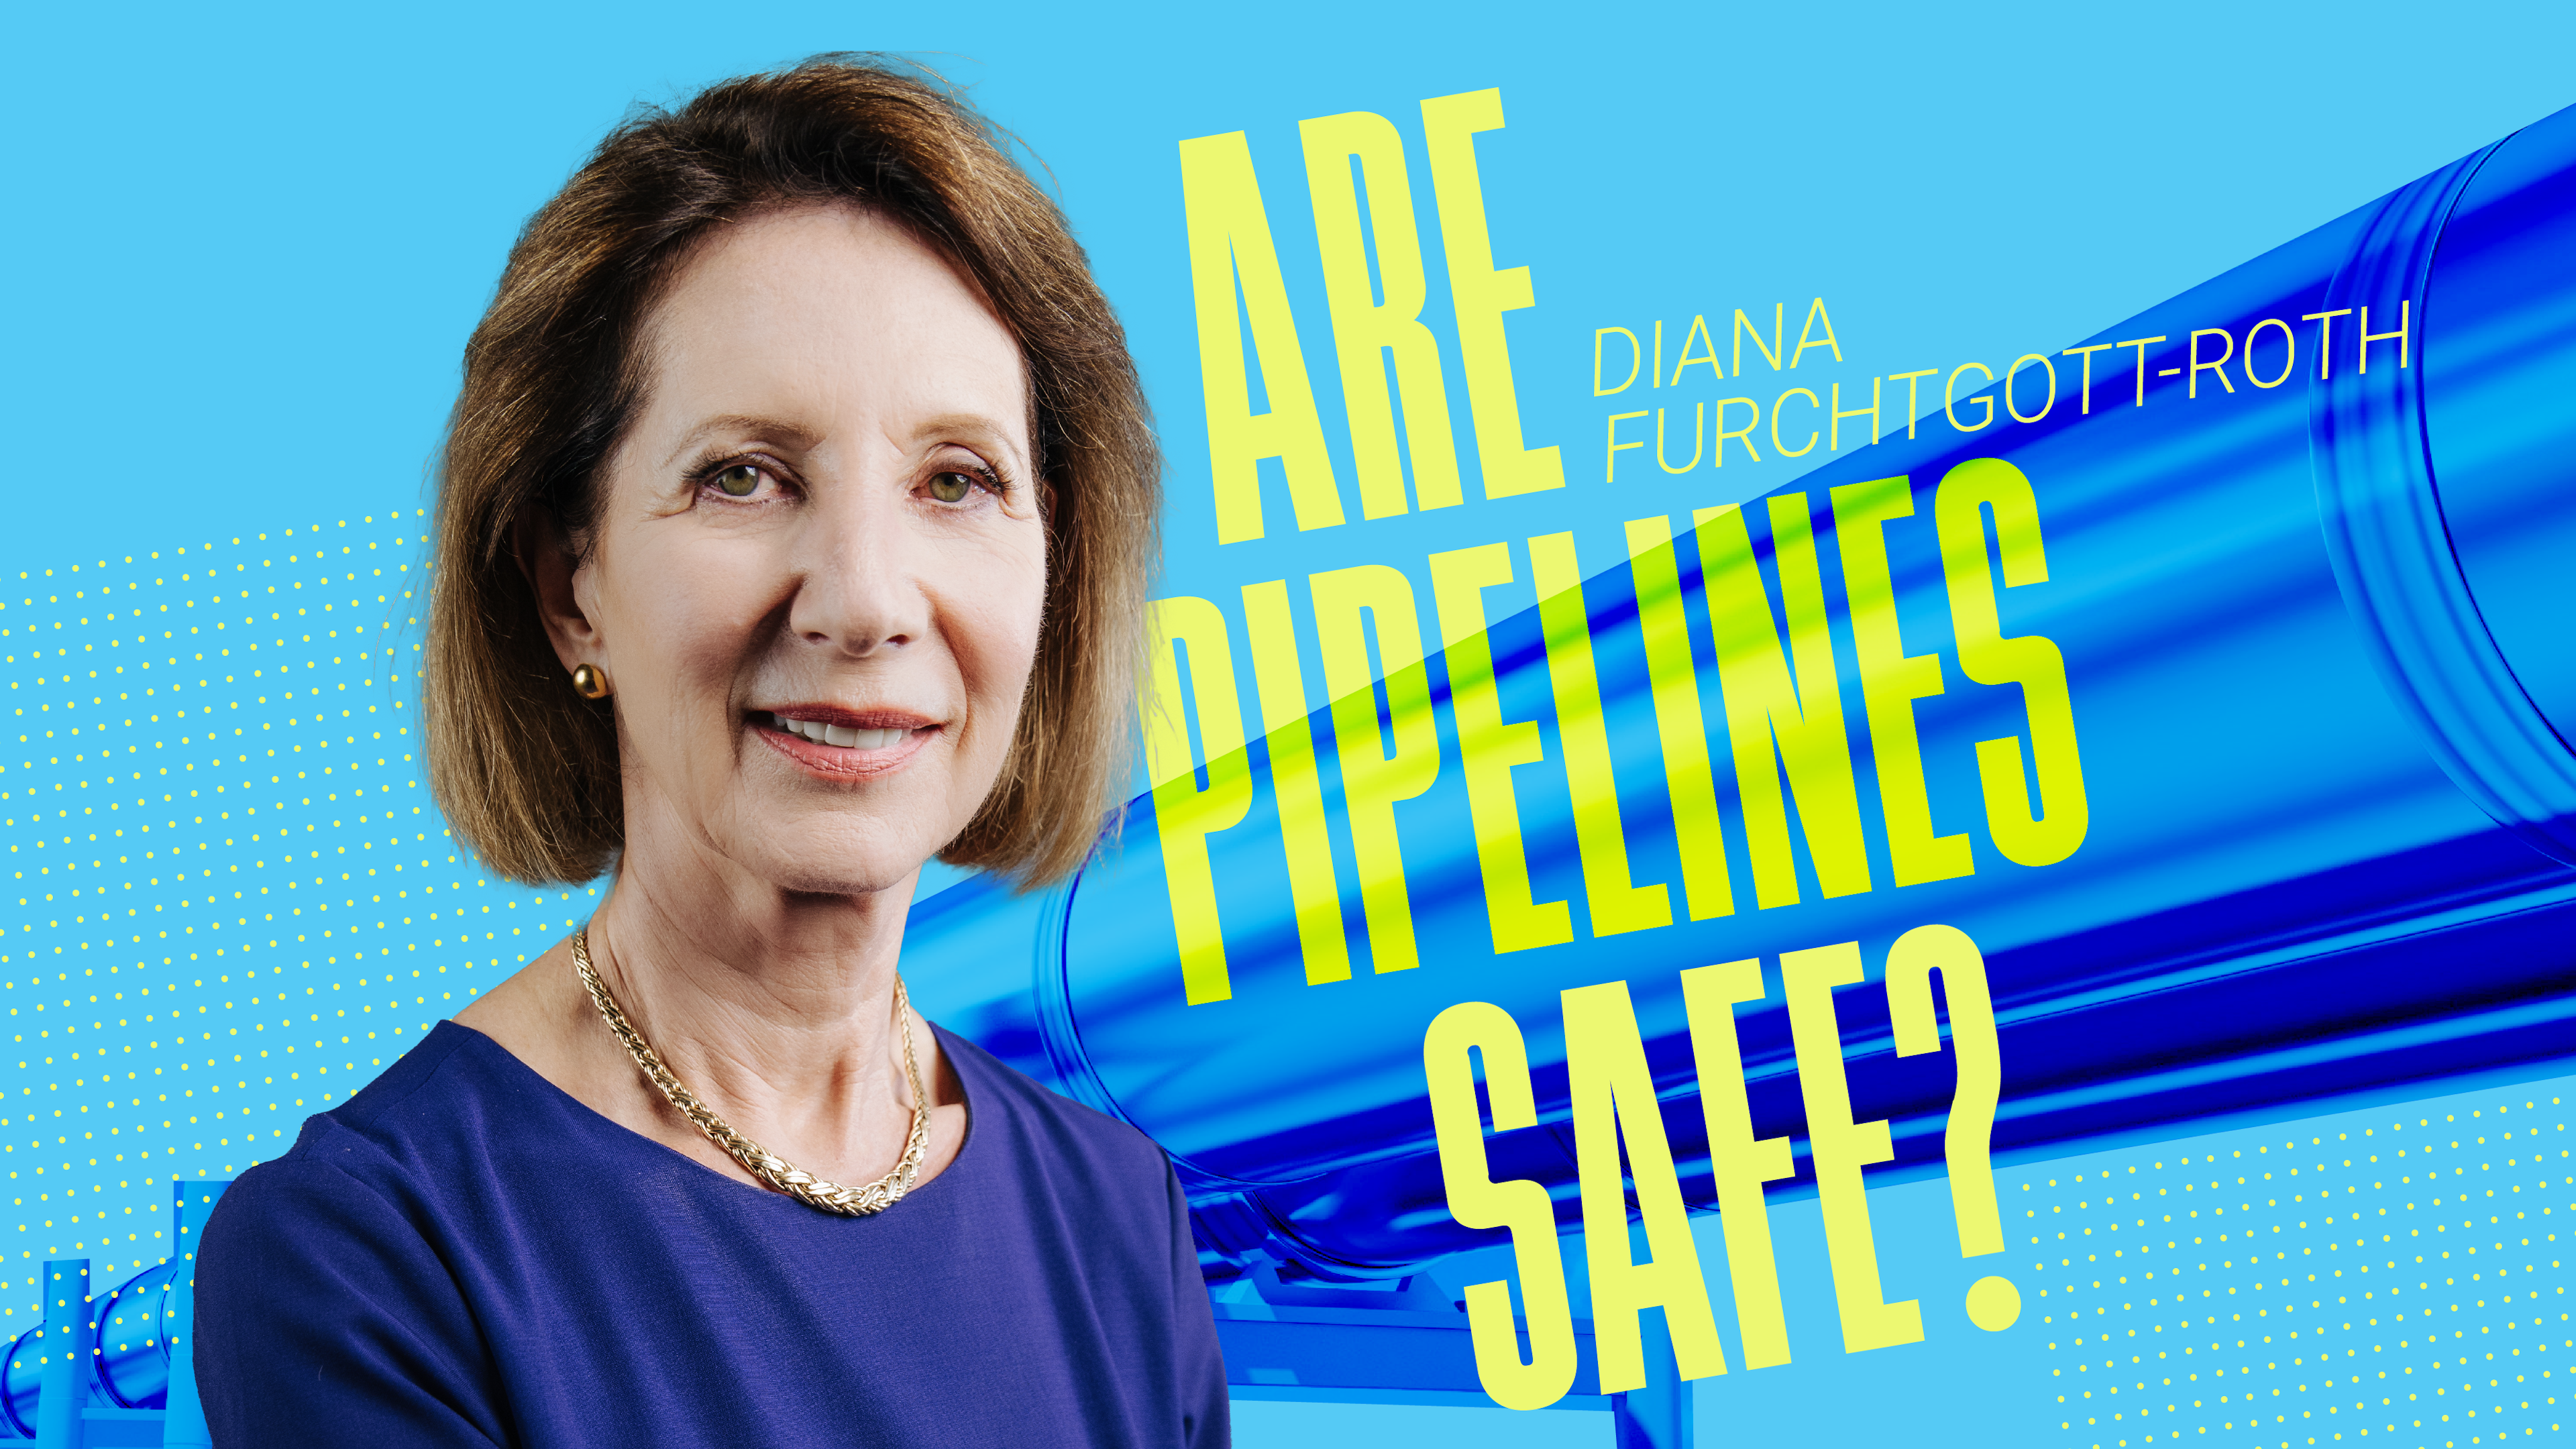 Are Pipelines Safe?